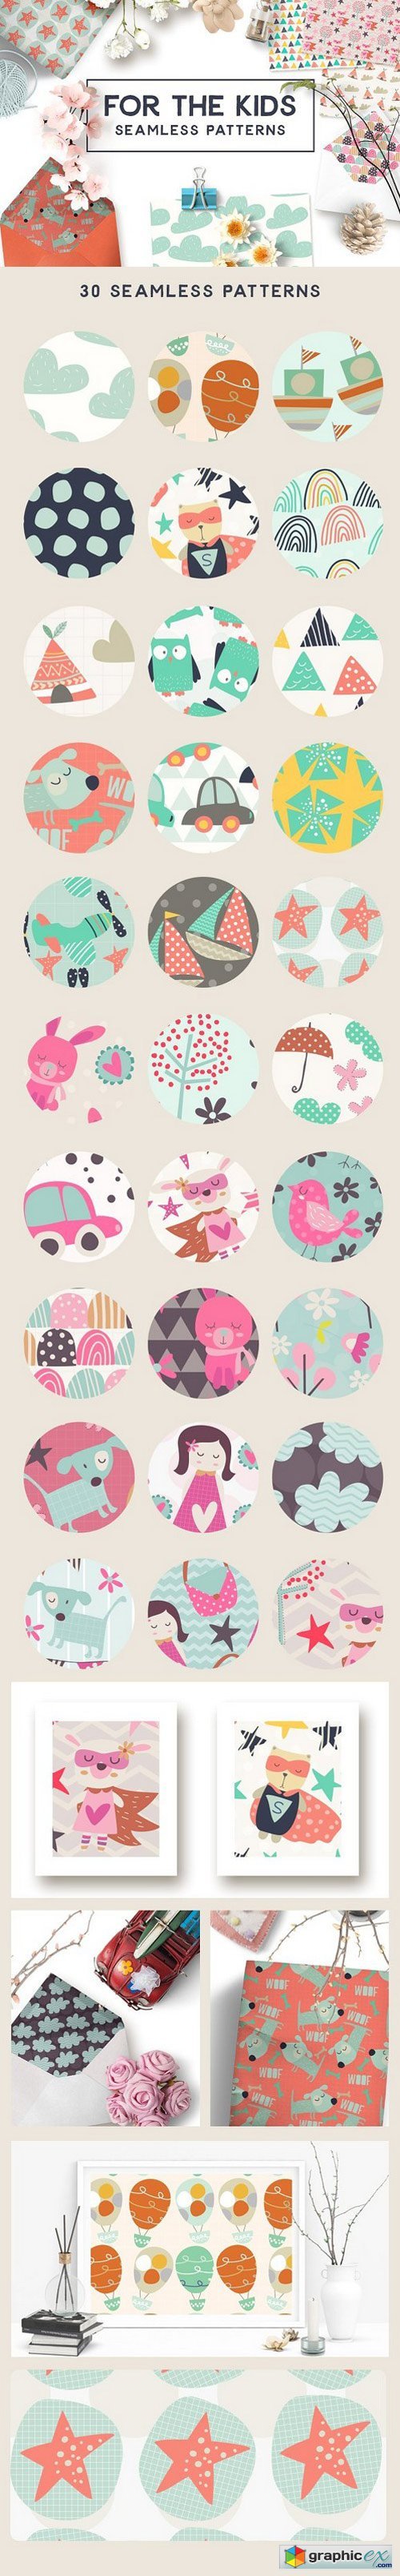 For the Kids Seamless Patterns